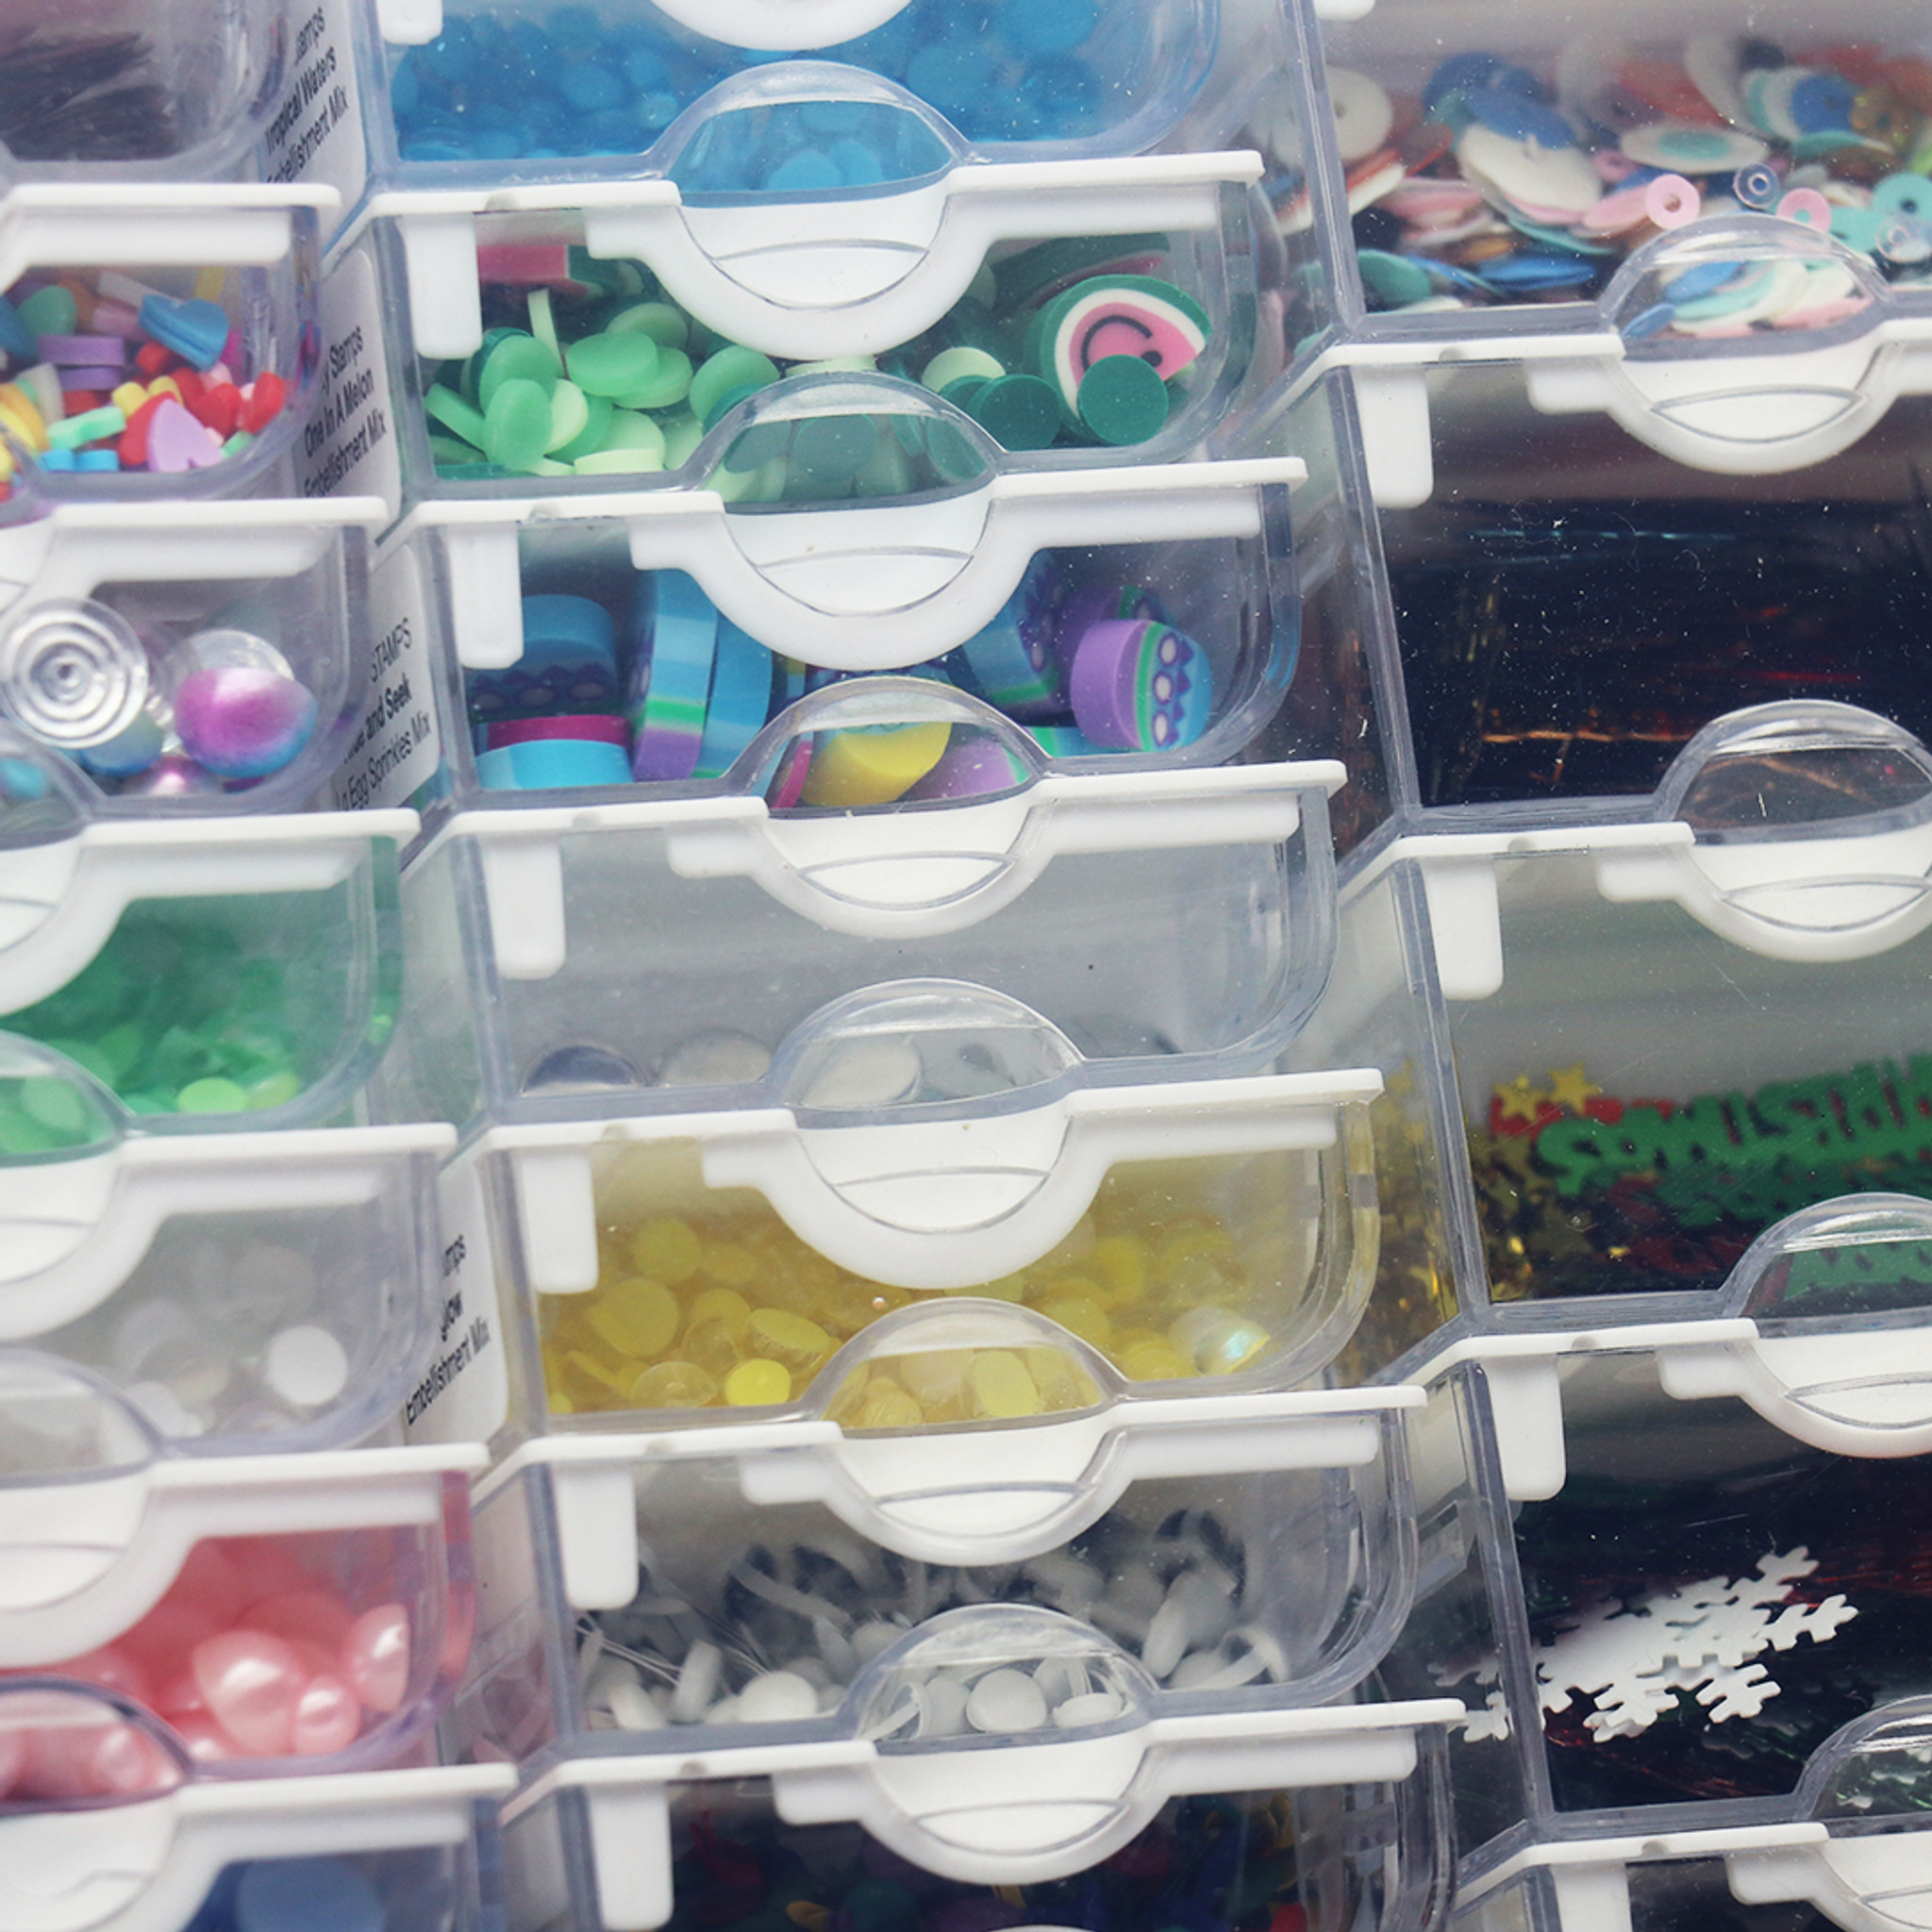 Bead Storage Solutions - Devices & Accessories Brands